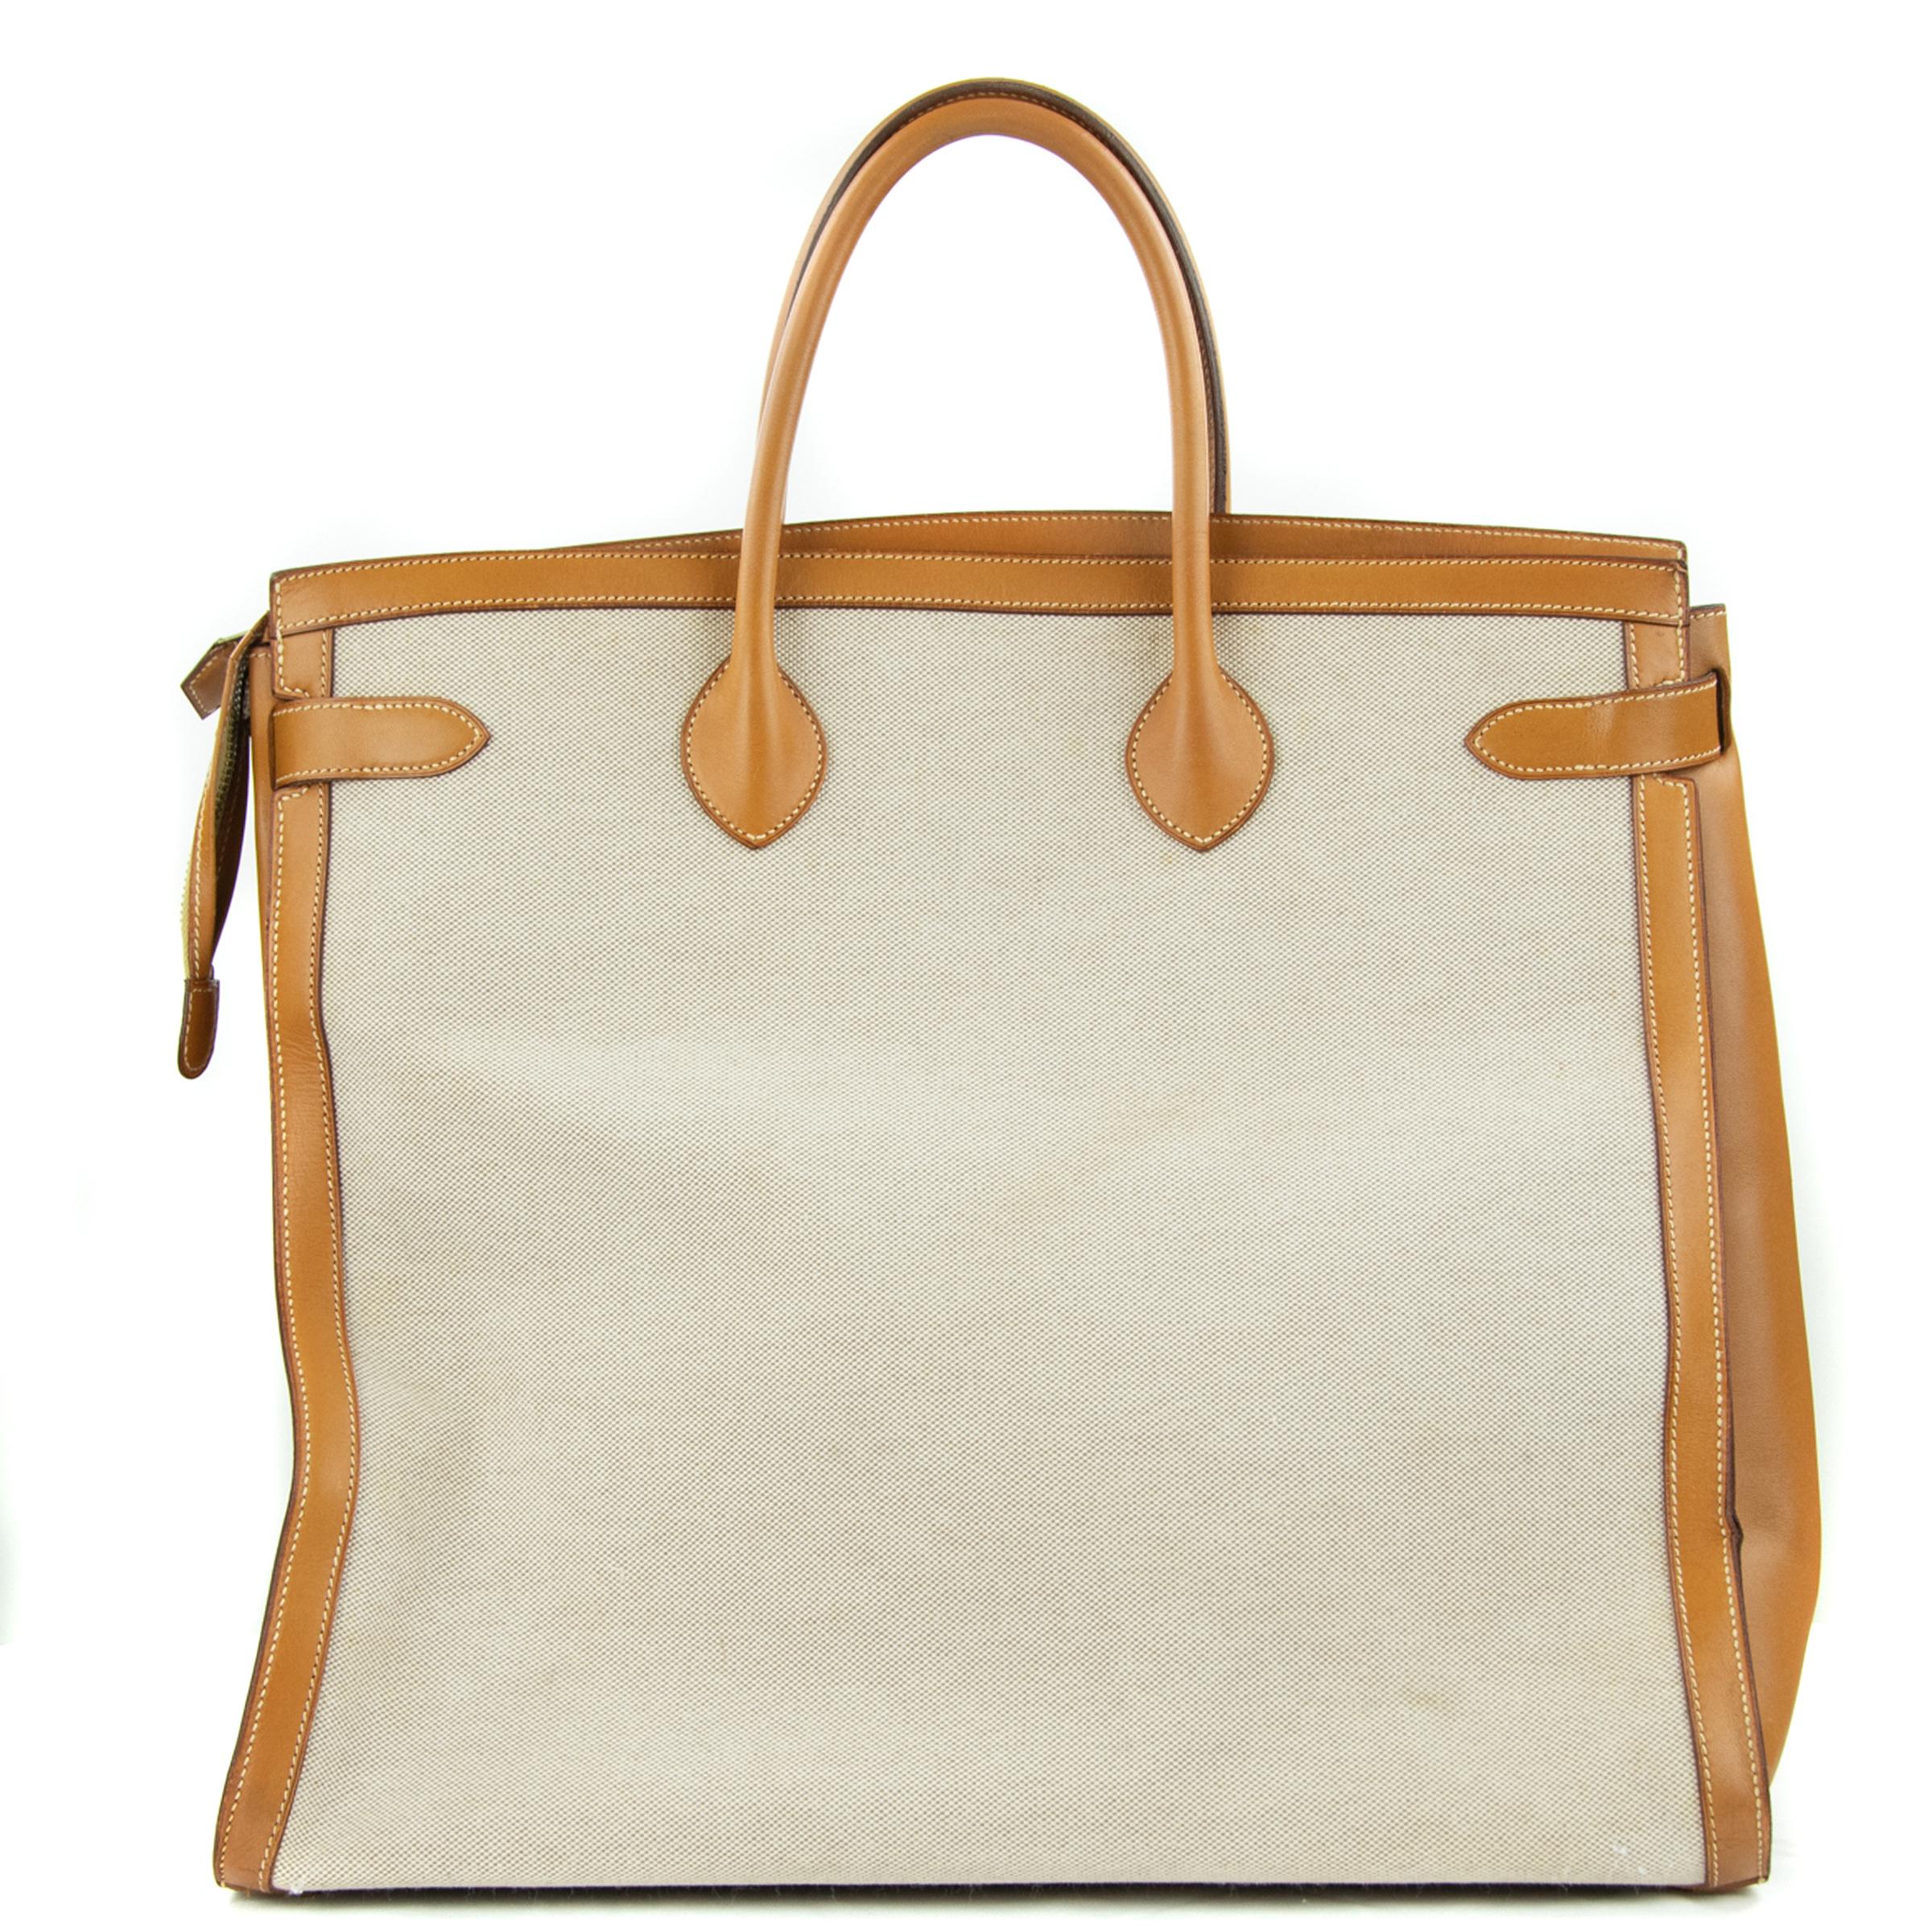 Hermes Toile & Vache Natural Weekend Bag. This iconic special order Hermes Weekend bag is timeless and chic. Fresh and crisp with gold hardware.

    Condition: New or Never used
    Made in France
    Bag Measures: 17